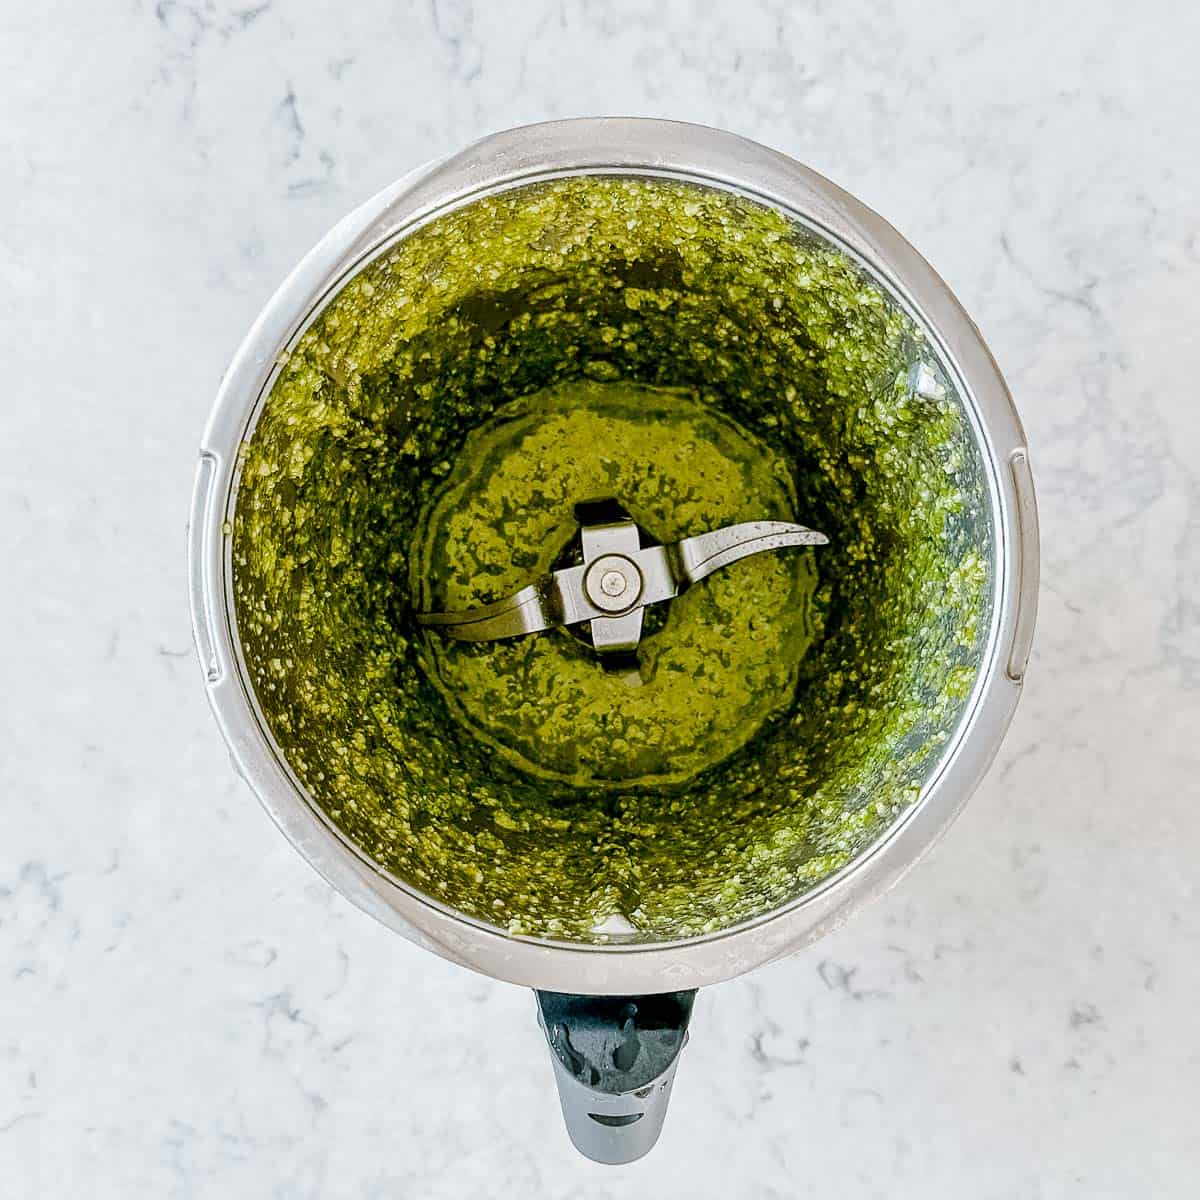 Image of Basil Pesto being made in the Thermomix.